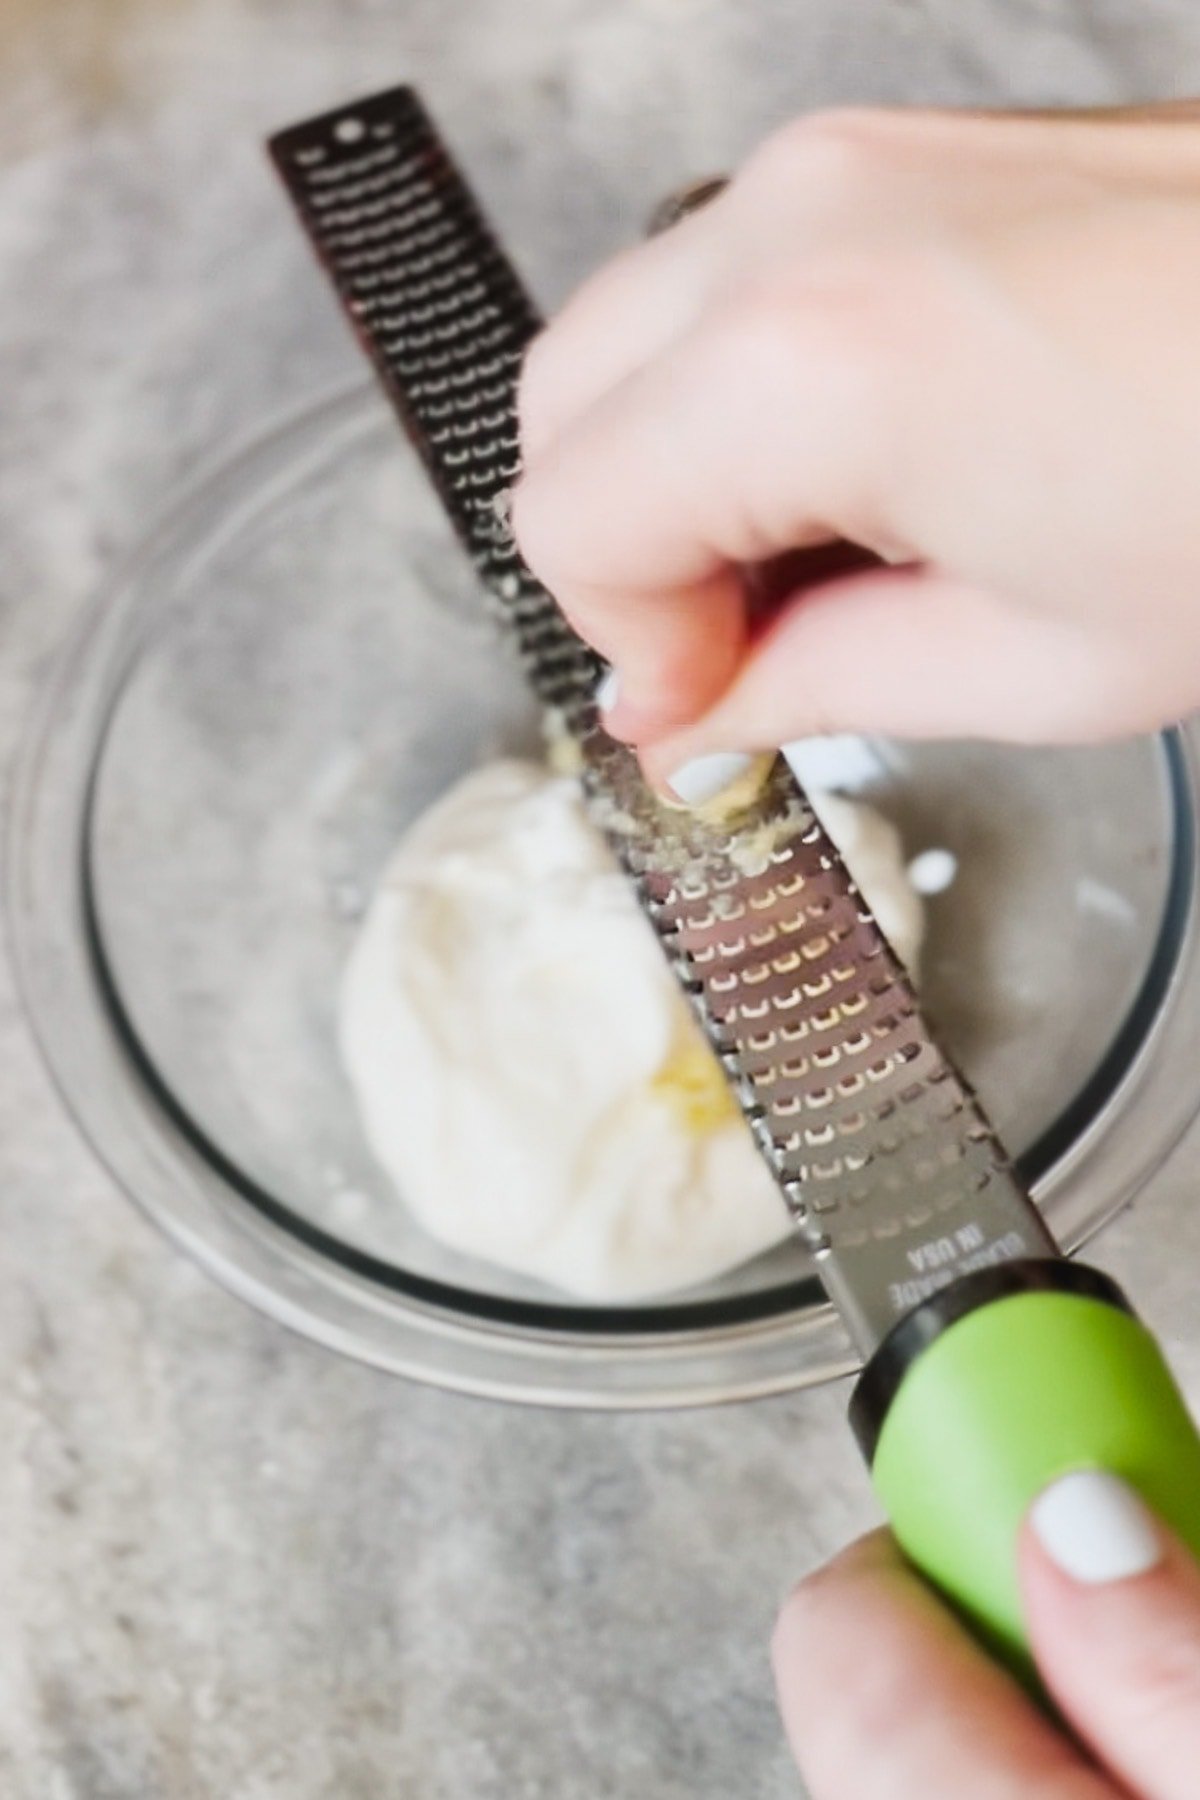 Grating garlic with a microplane grater.